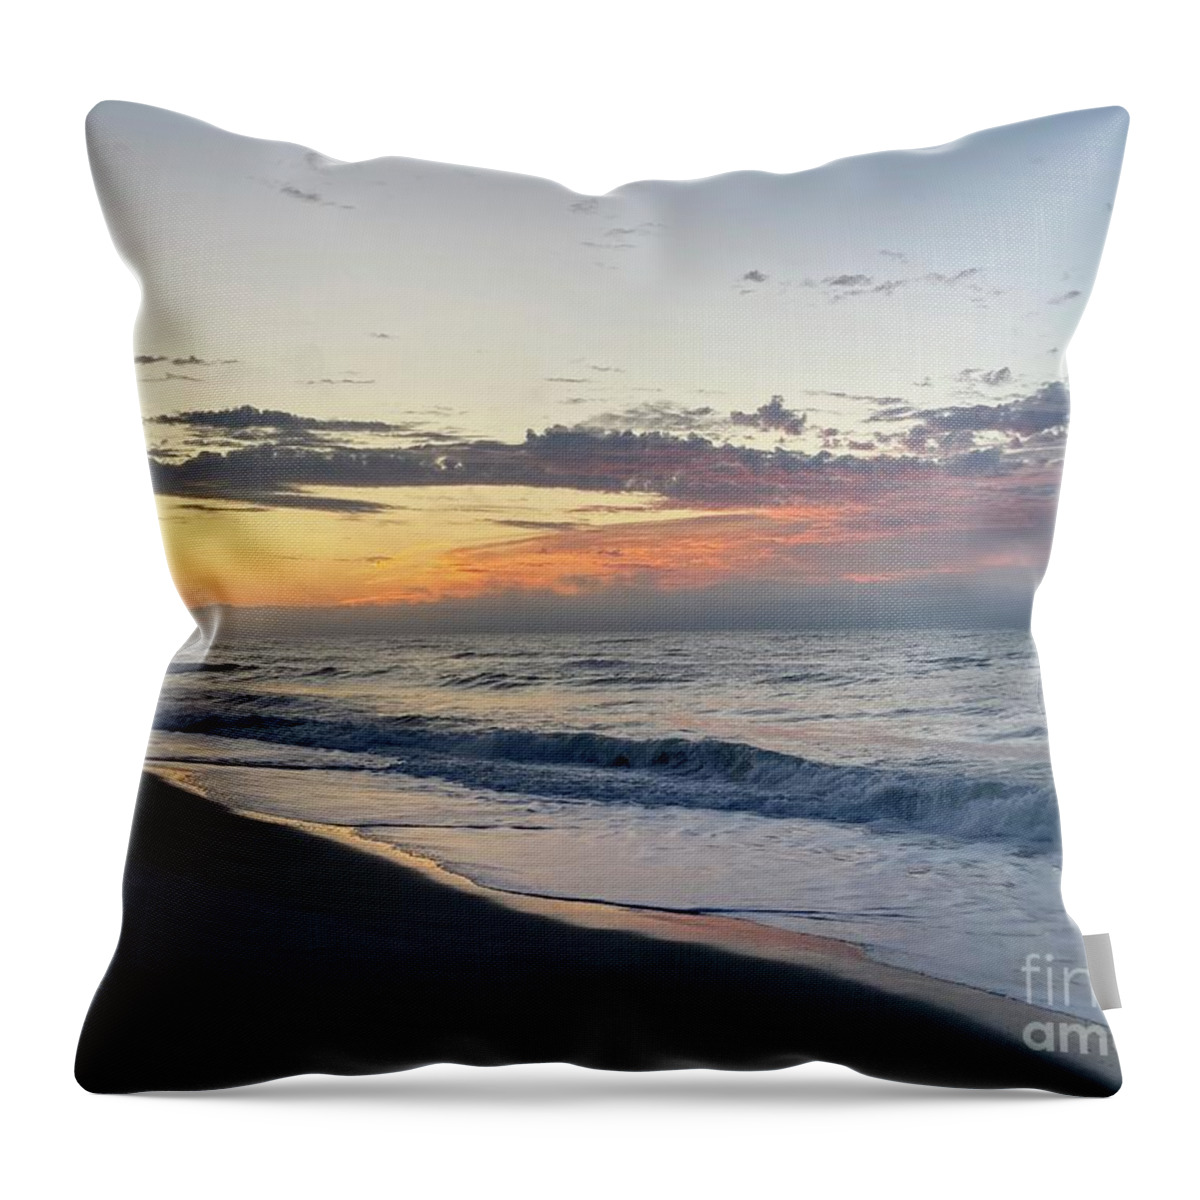  Throw Pillow featuring the photograph Beach12 by Mary Kobet